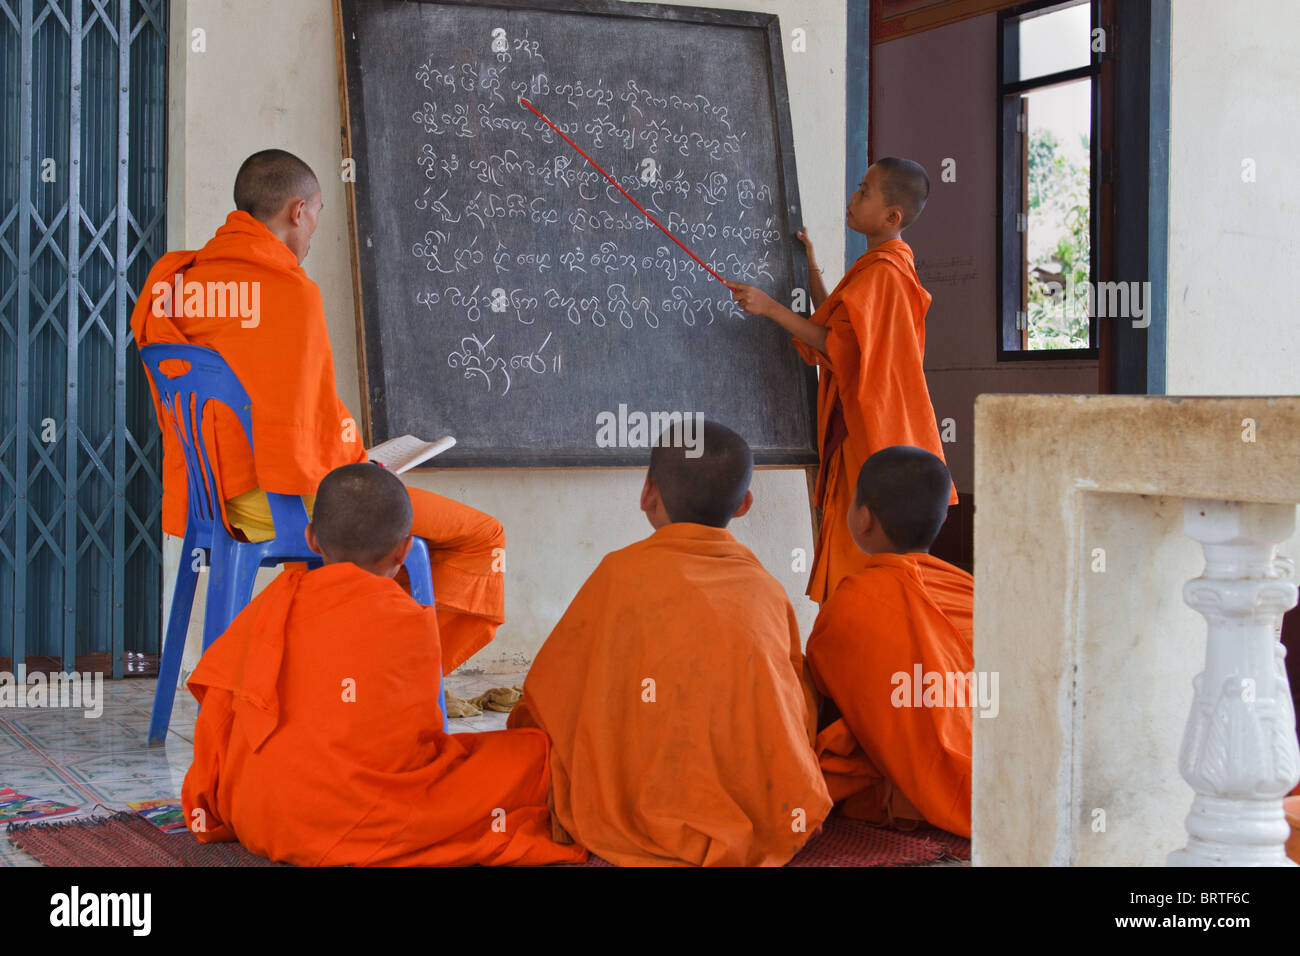 A Burmese novice monk  stands at a blackboard reviewing what his teacher has written Stock Photo